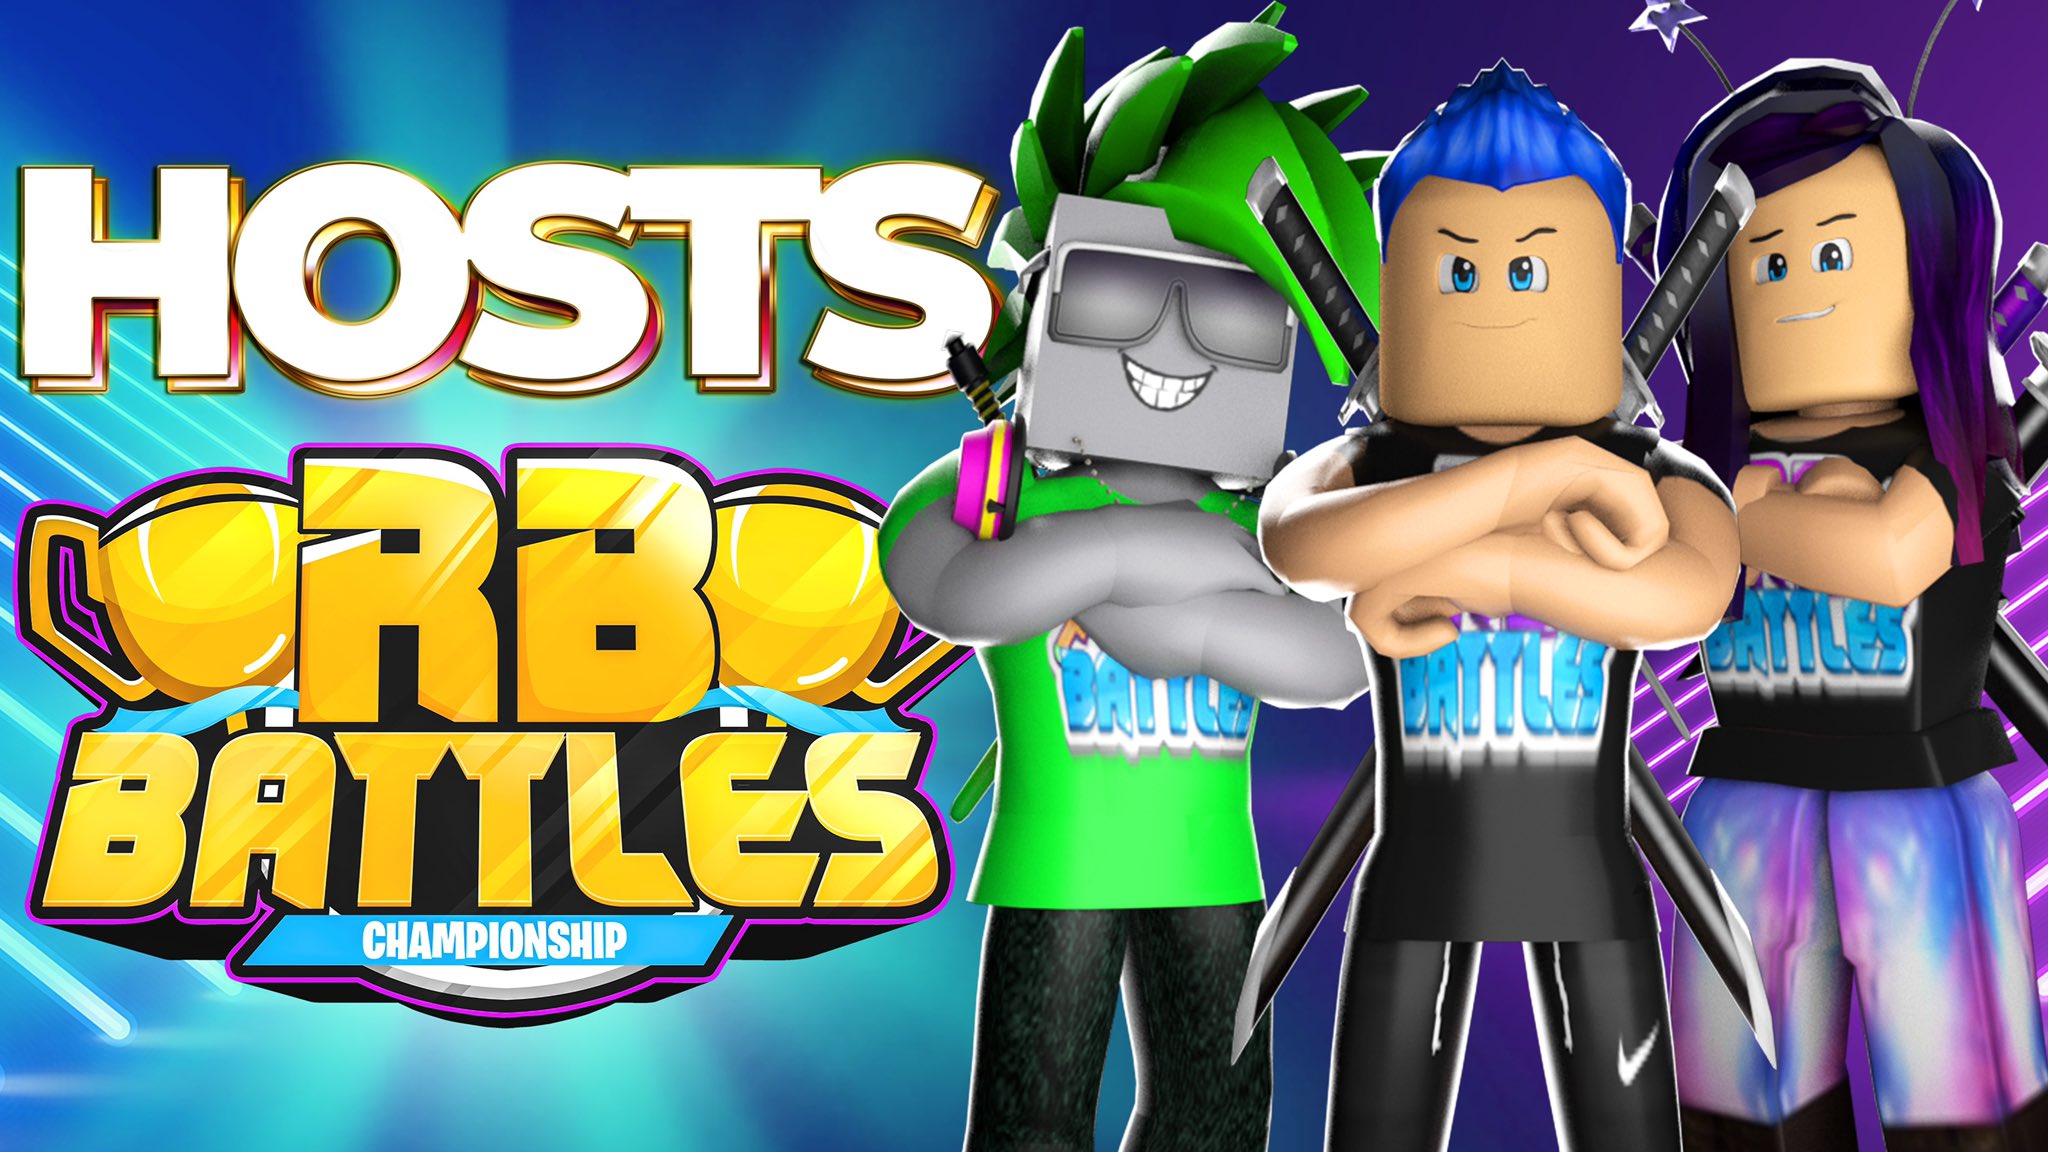 Roblox Battles On Twitter Introducing Your Hosts Djmonopoli Russotalks Sabrinabrite The Action Begins Tomorrow Make Sure You Re Subscribed To The Rb Battles Youtube Channel To See - roblox battles on twitter a new competitor joins the